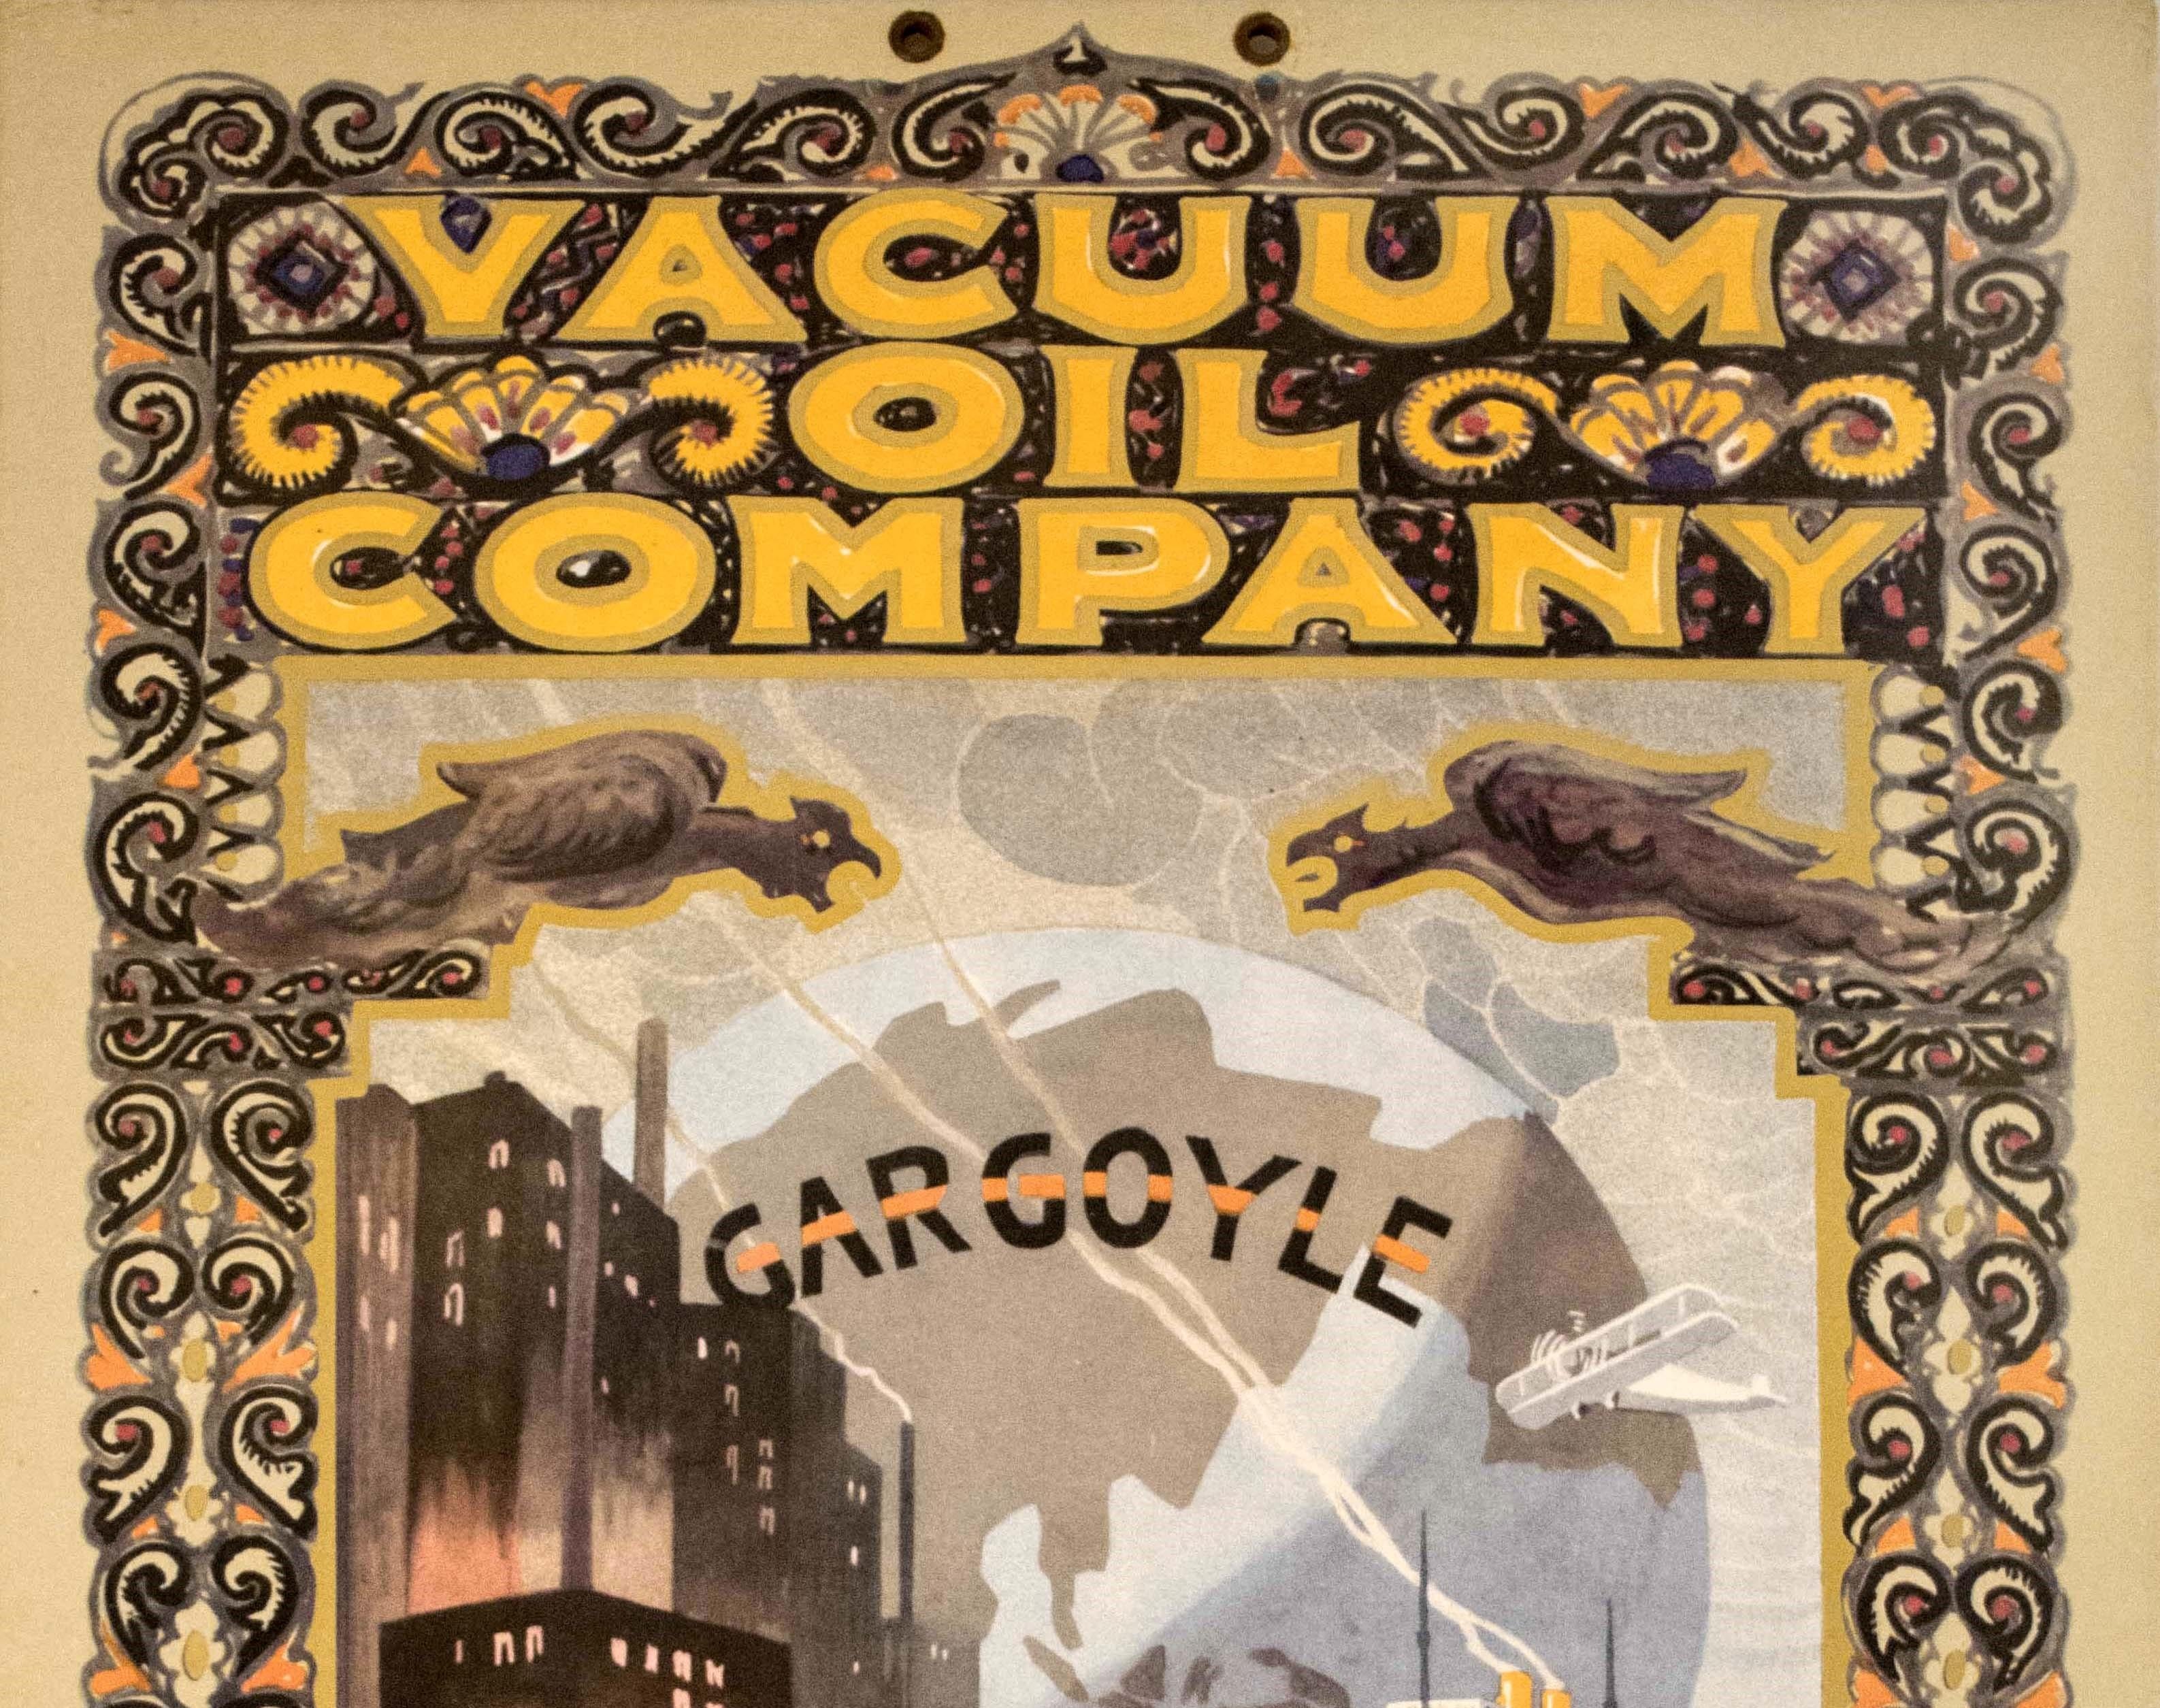 Original vintage advertising poster for the Vacuum Oil Company featuring a stunning Art Deco style design of a truck and classic car driving in front of industrial buildings with a steam ship at sea below a bi-plane in front of a map of the world as